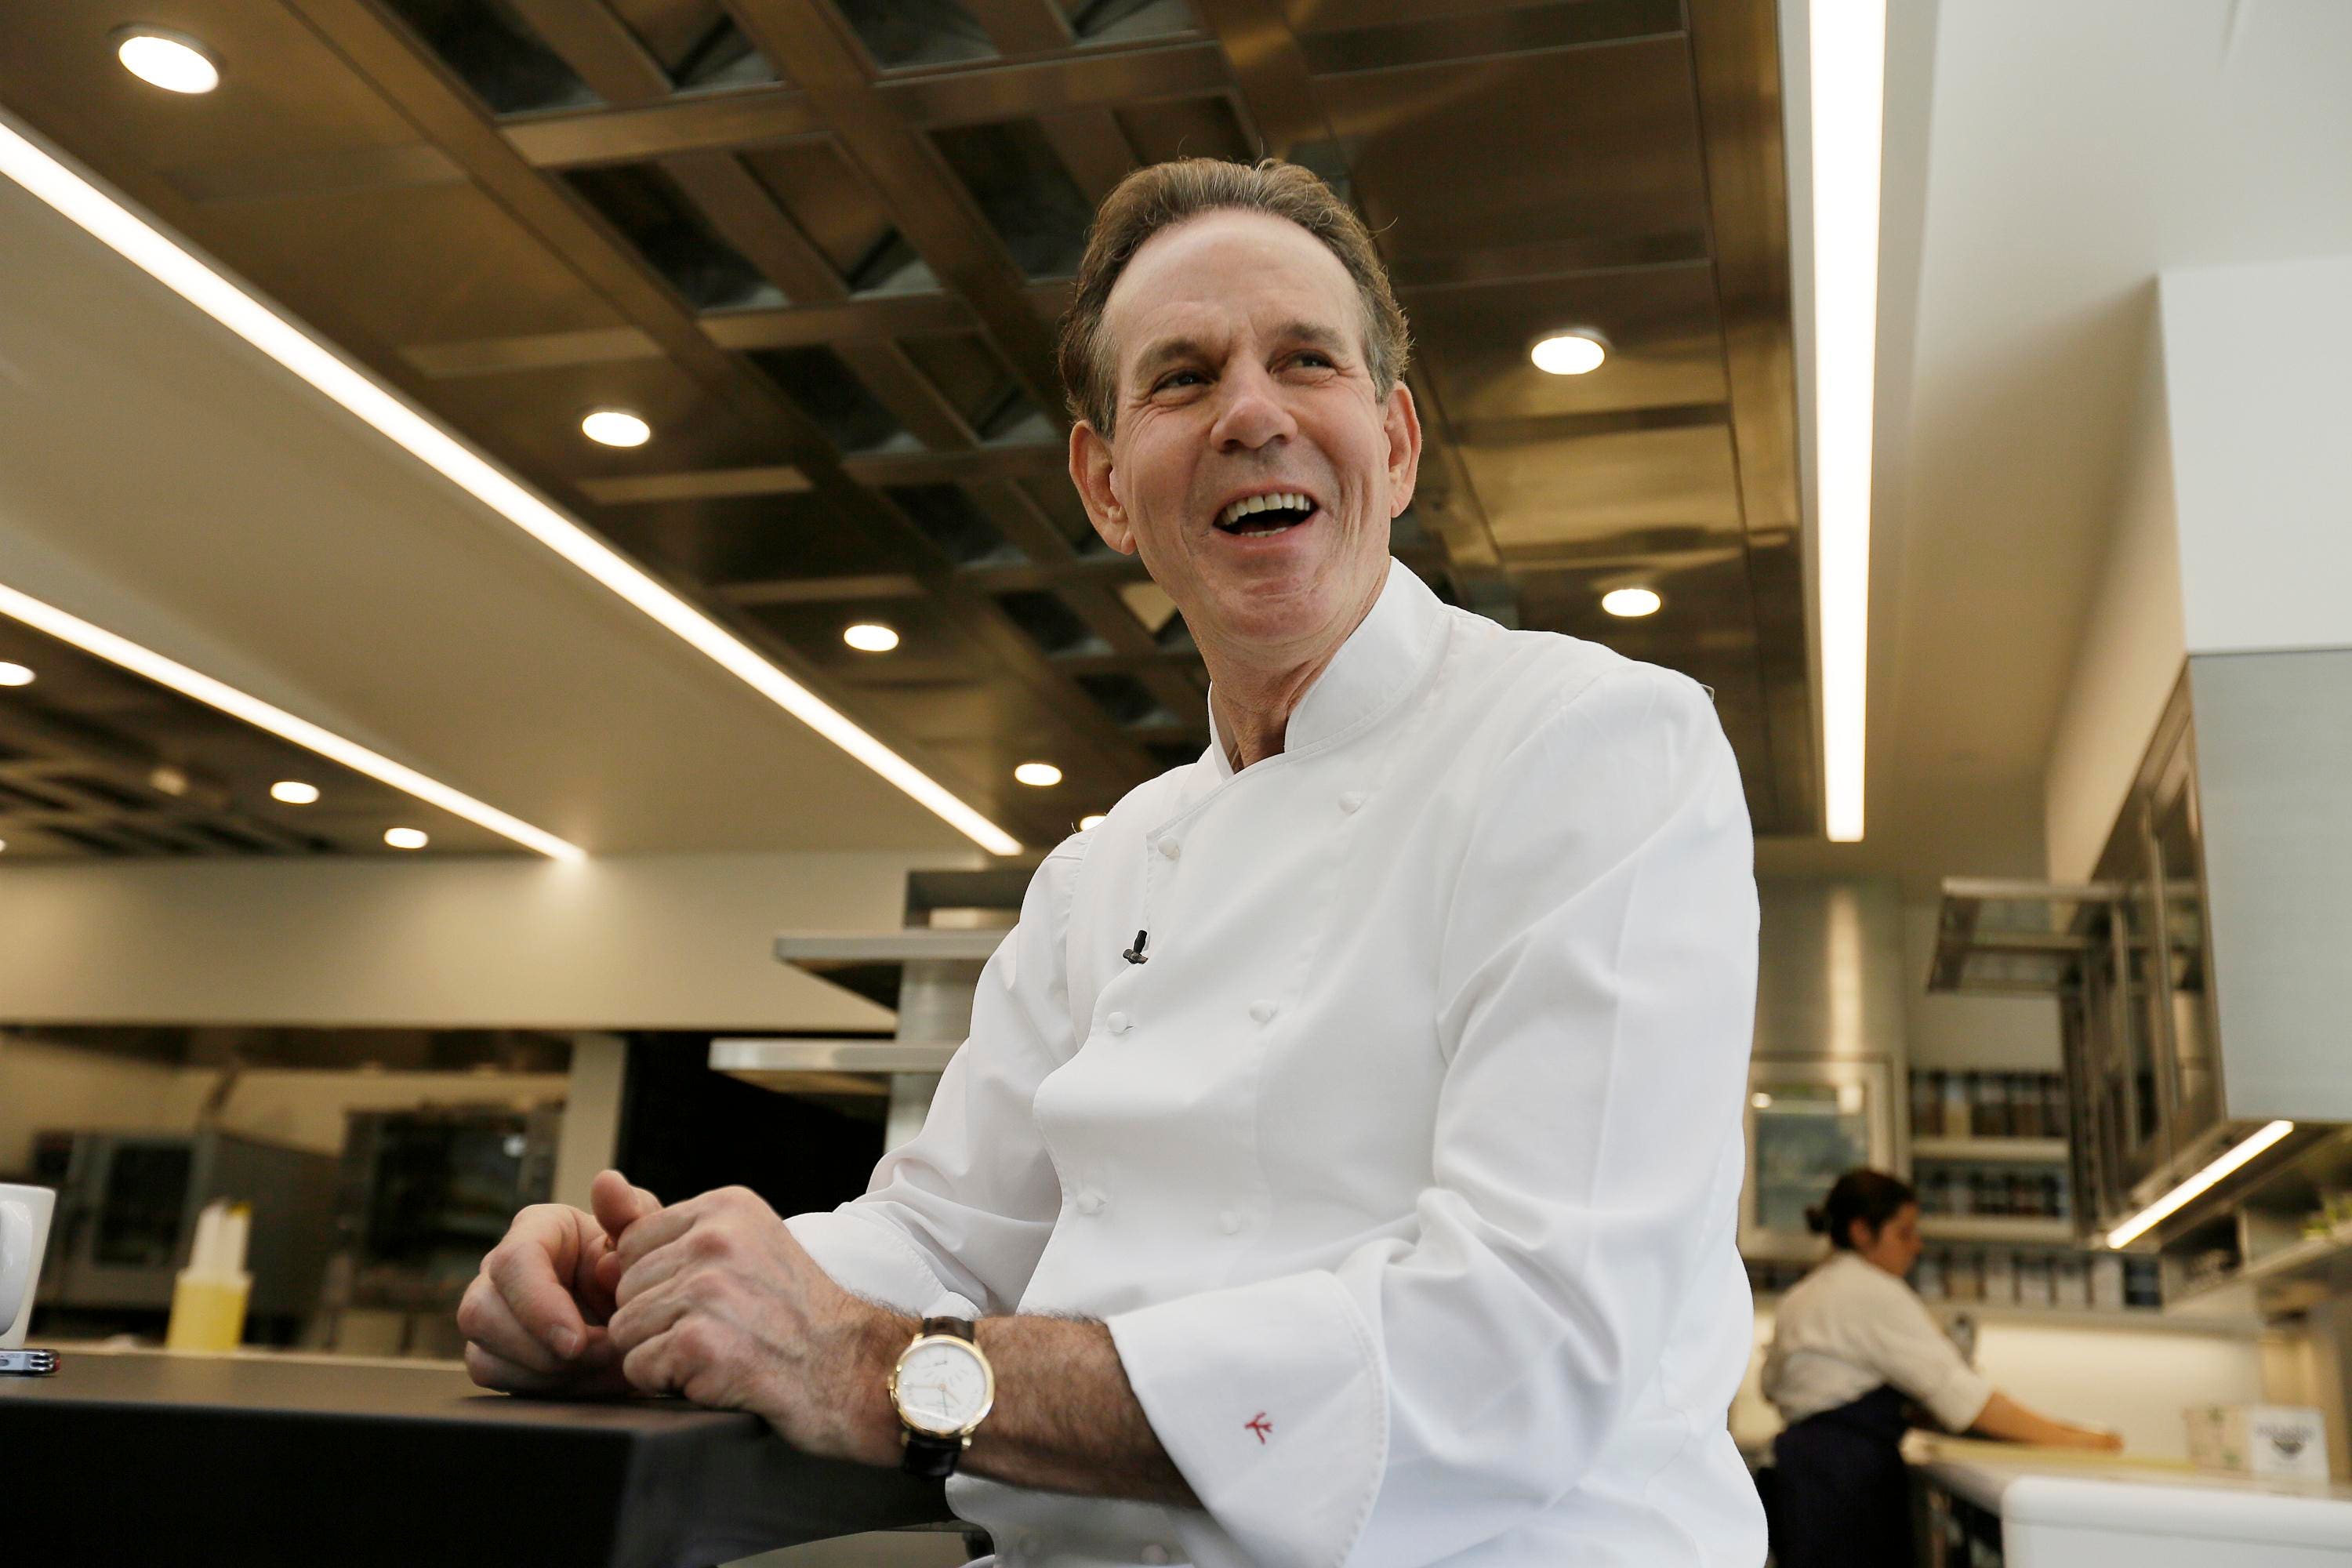 Chef Thomas Keller uses these world-class knives in his Michelin-star kitchen – and they are now on sale